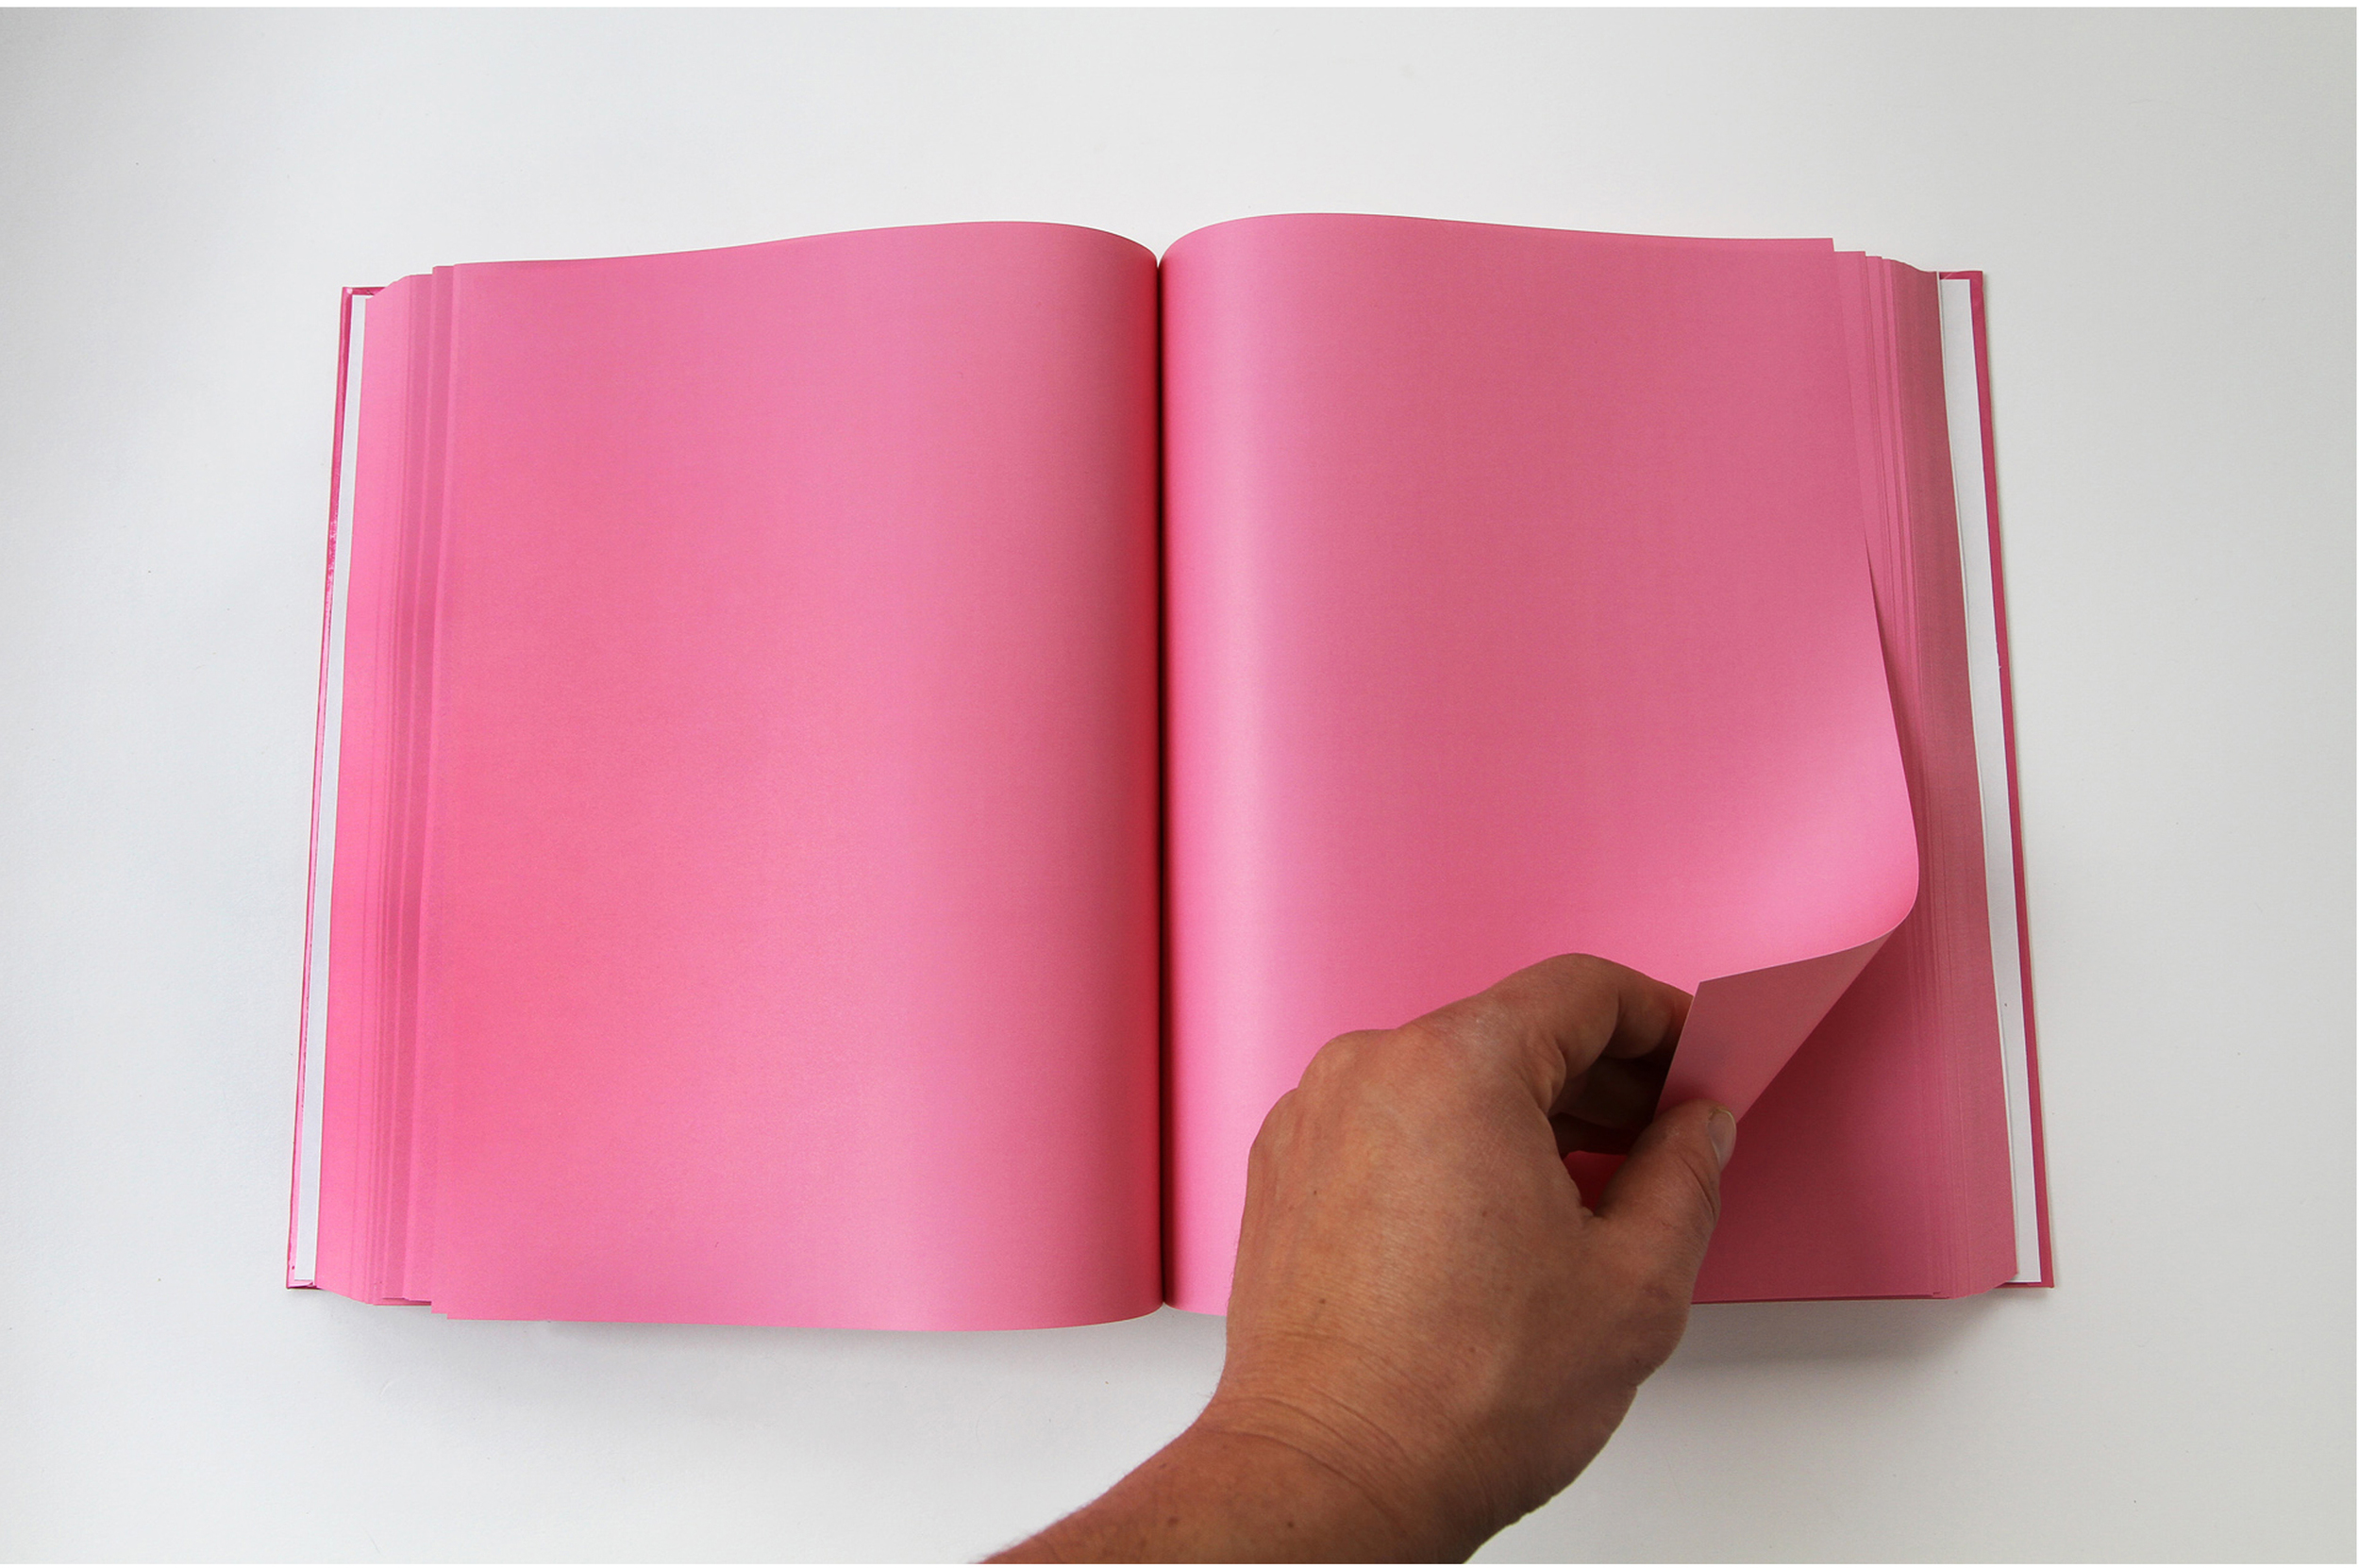   Cookbook  2013 Baker-Miller Pink printed book (800 pages), edition of 3 11.75 x 8.25 x 2 inches 